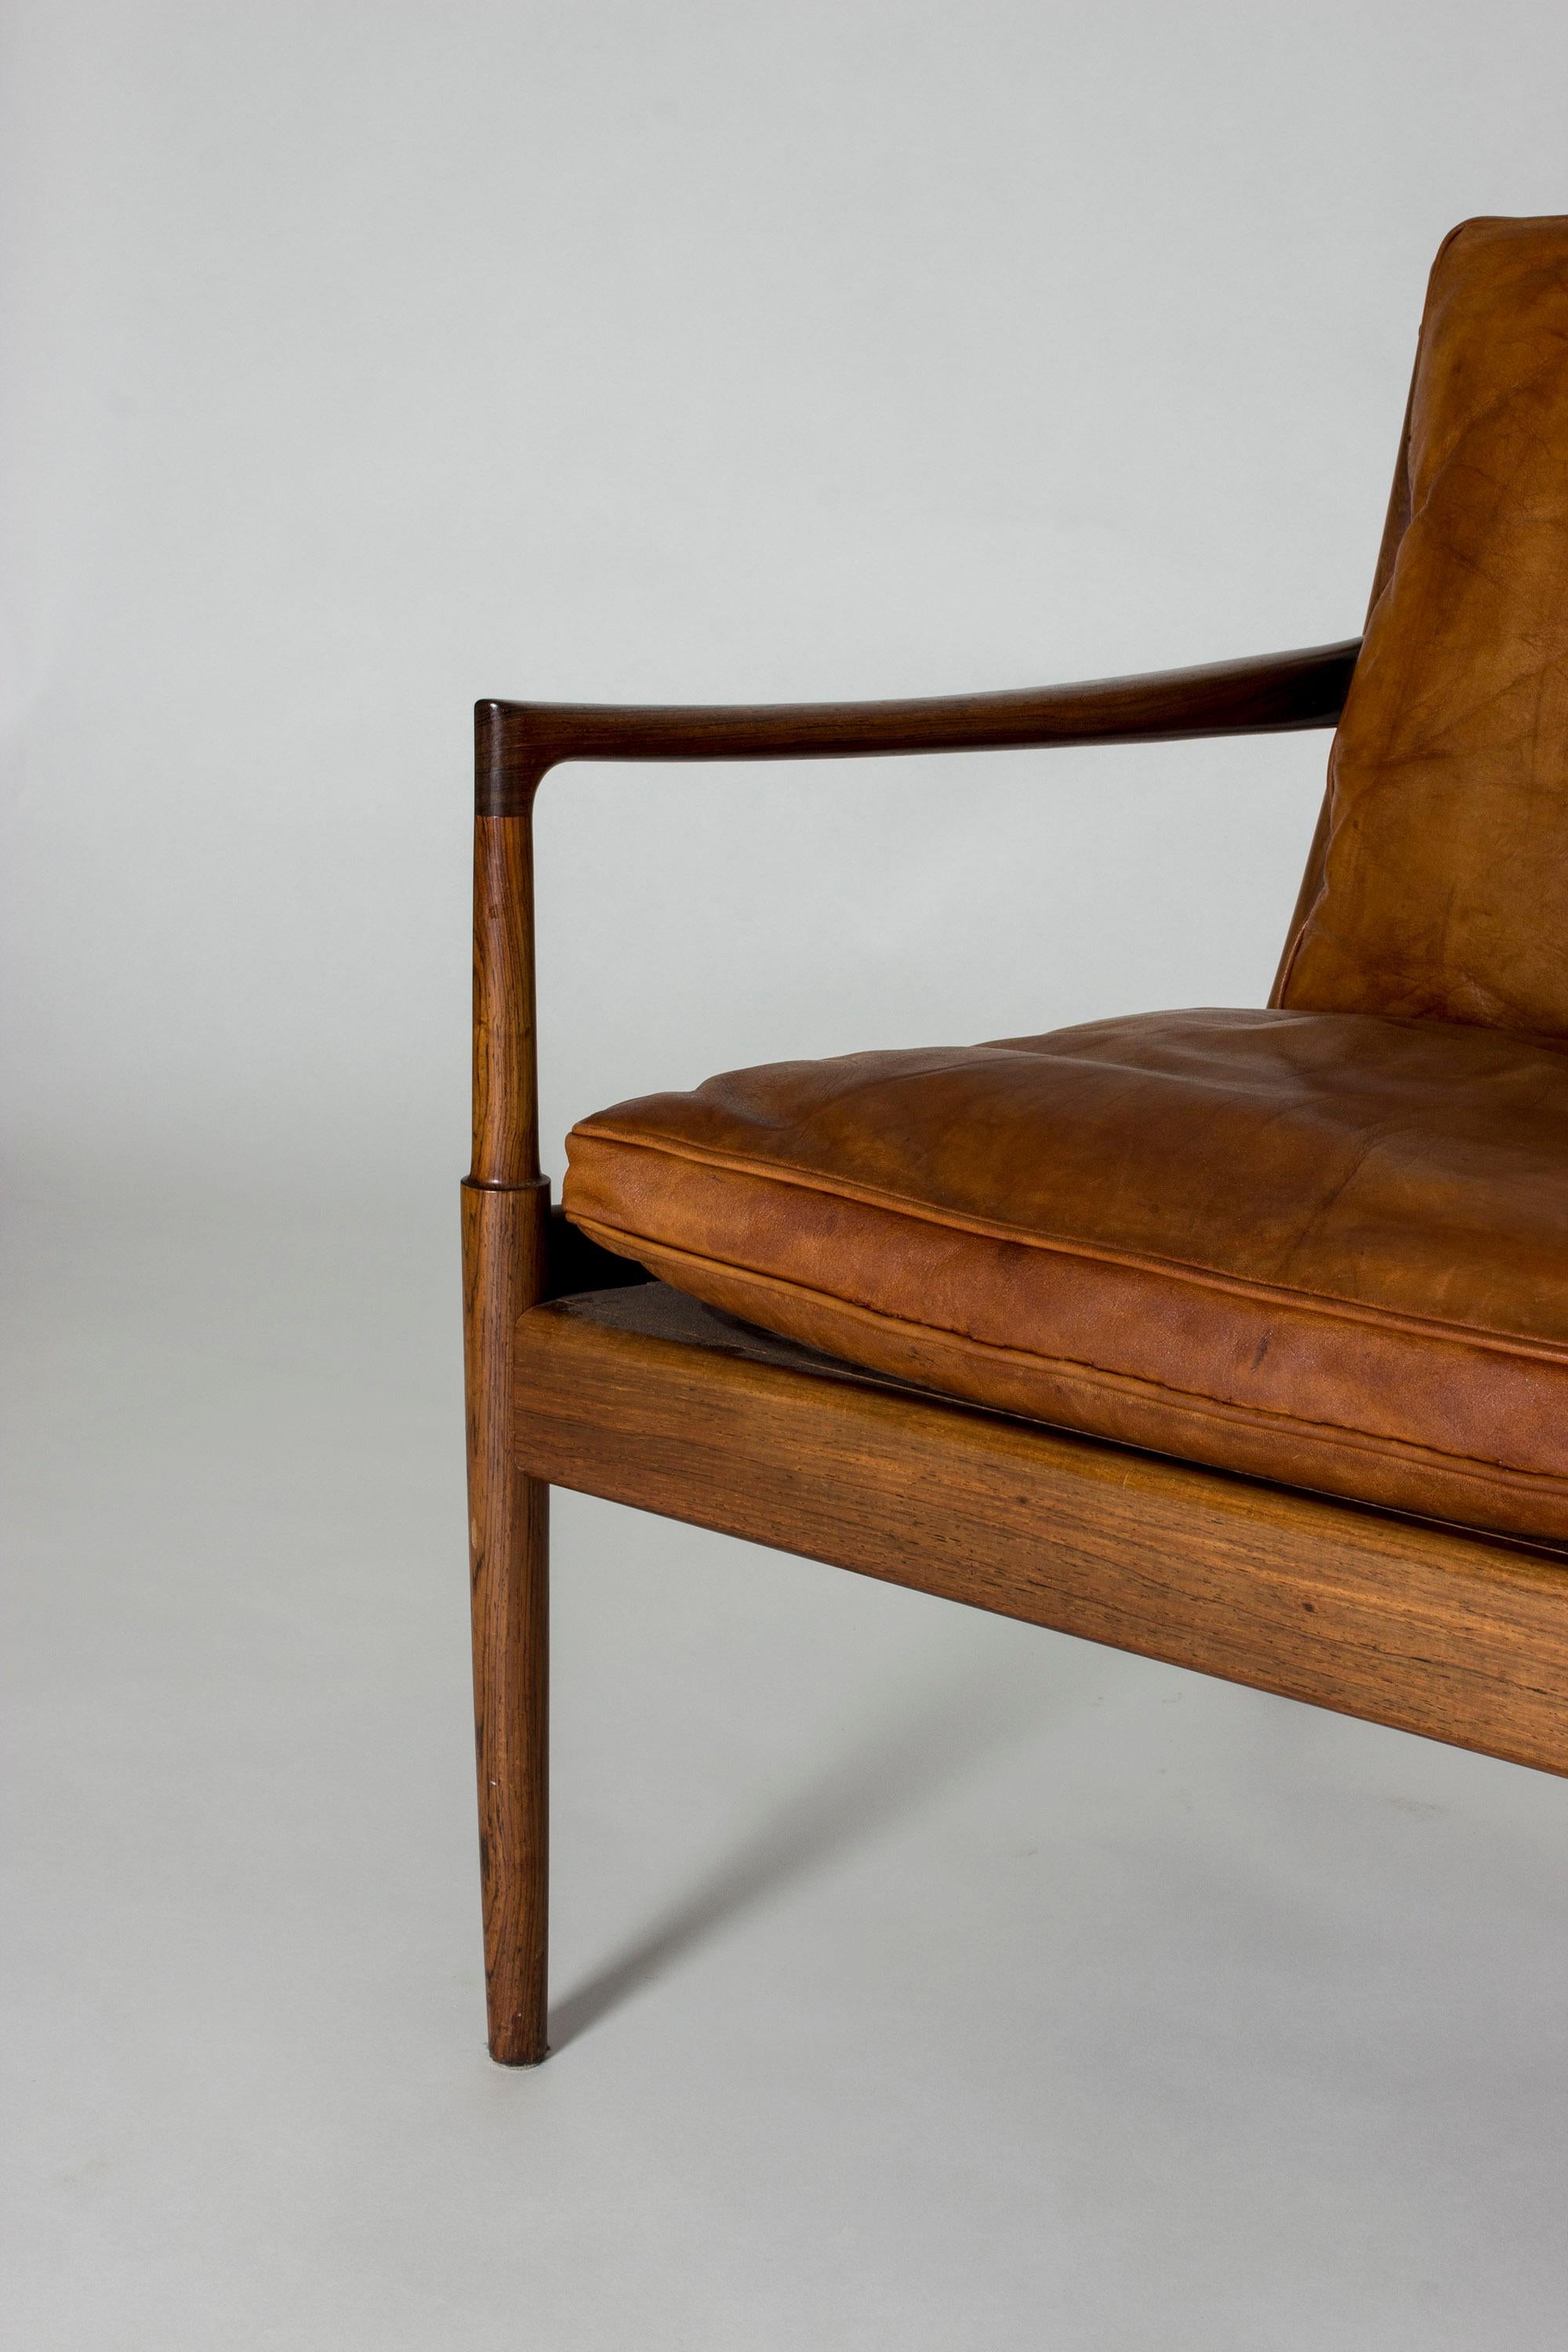 Pair of Rosewood and Leather “Samsö” Lounge Chairs by Ib Kofod Larsen 3